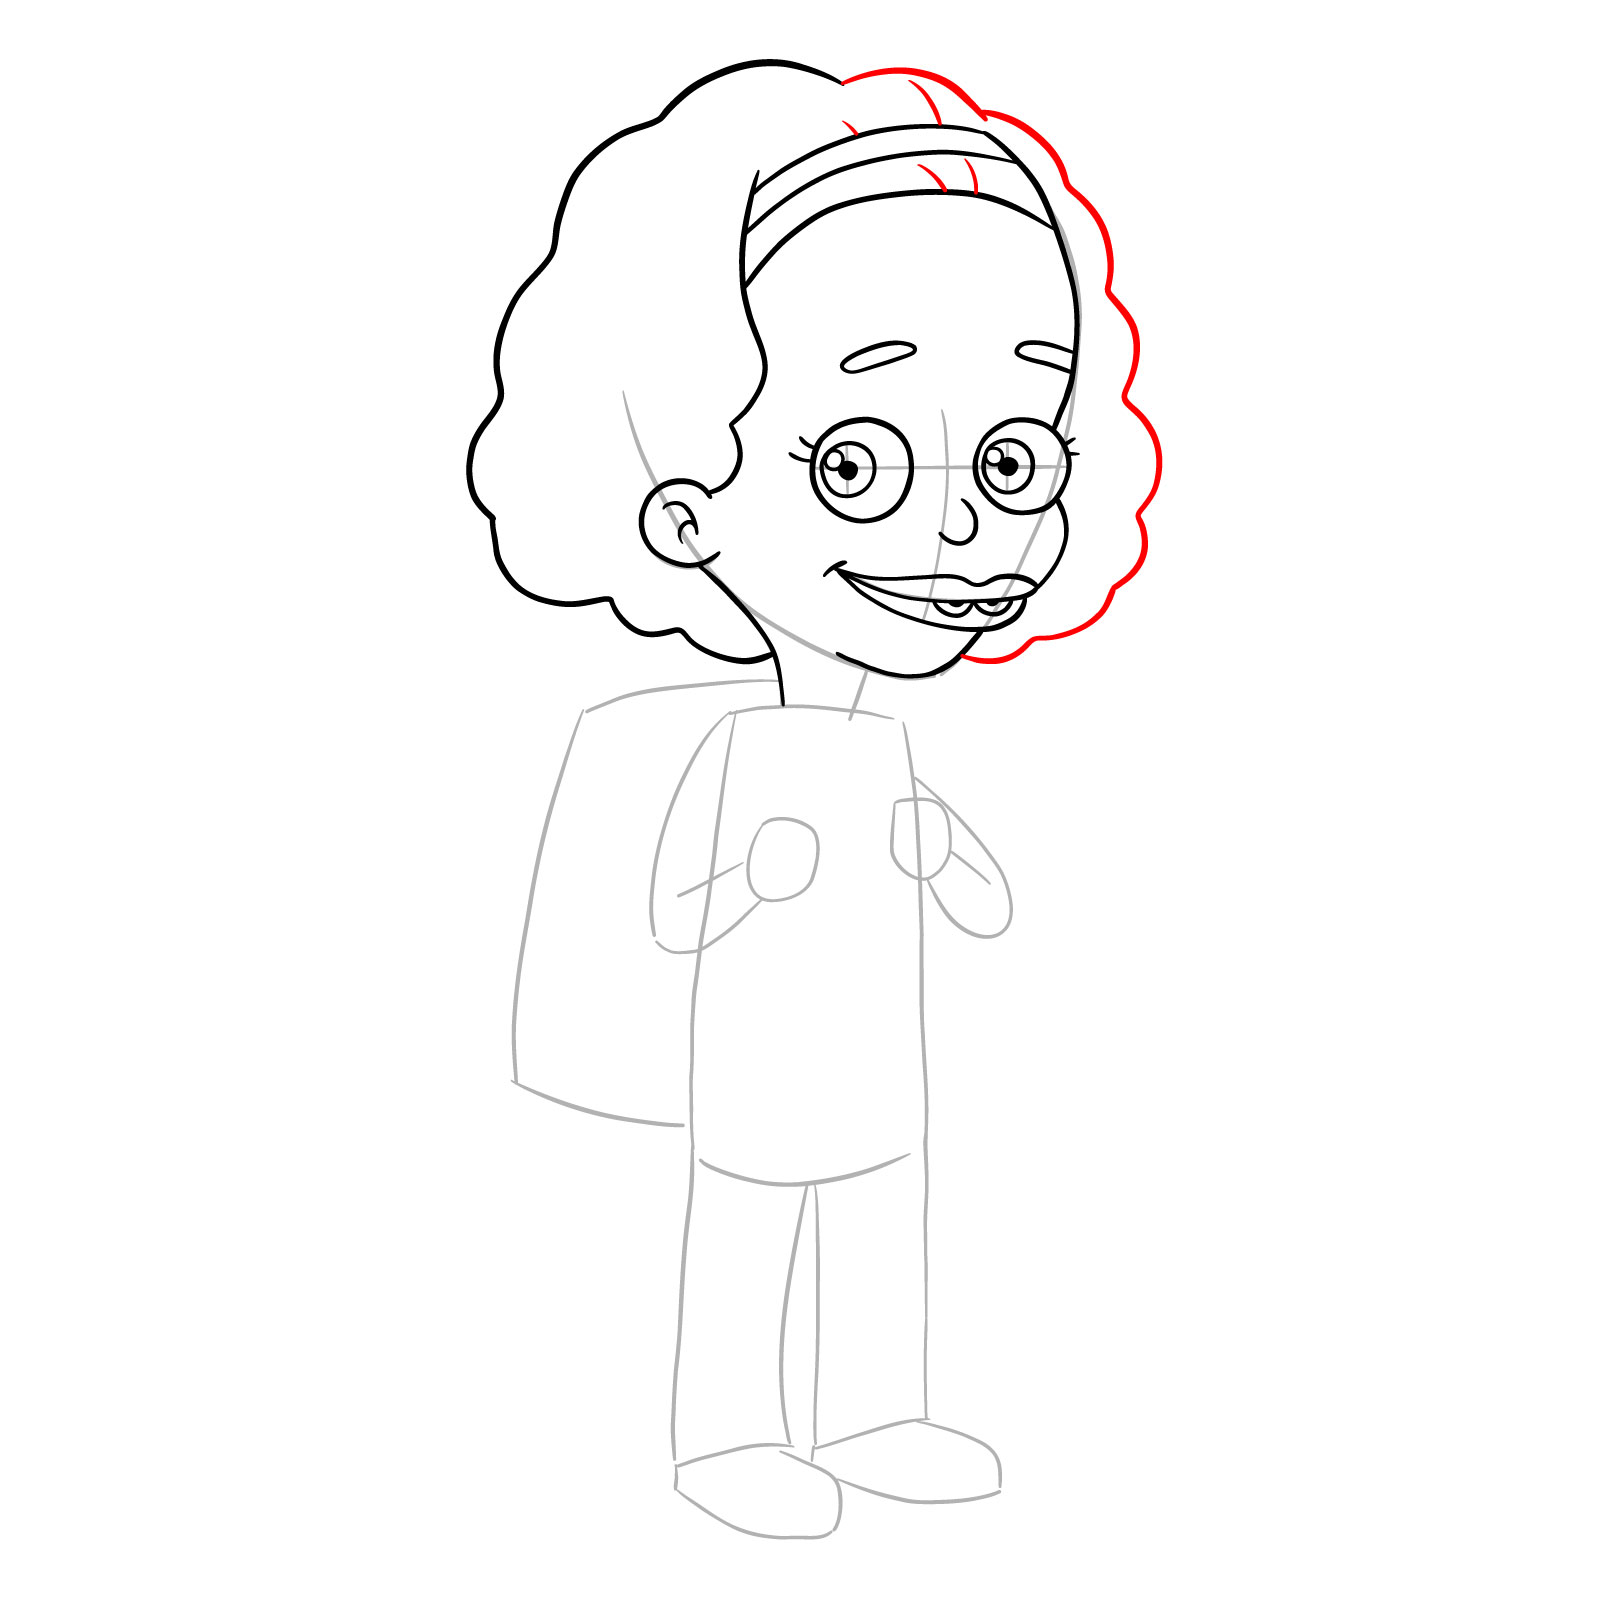 How to draw Missy from Big Mouth - step 12